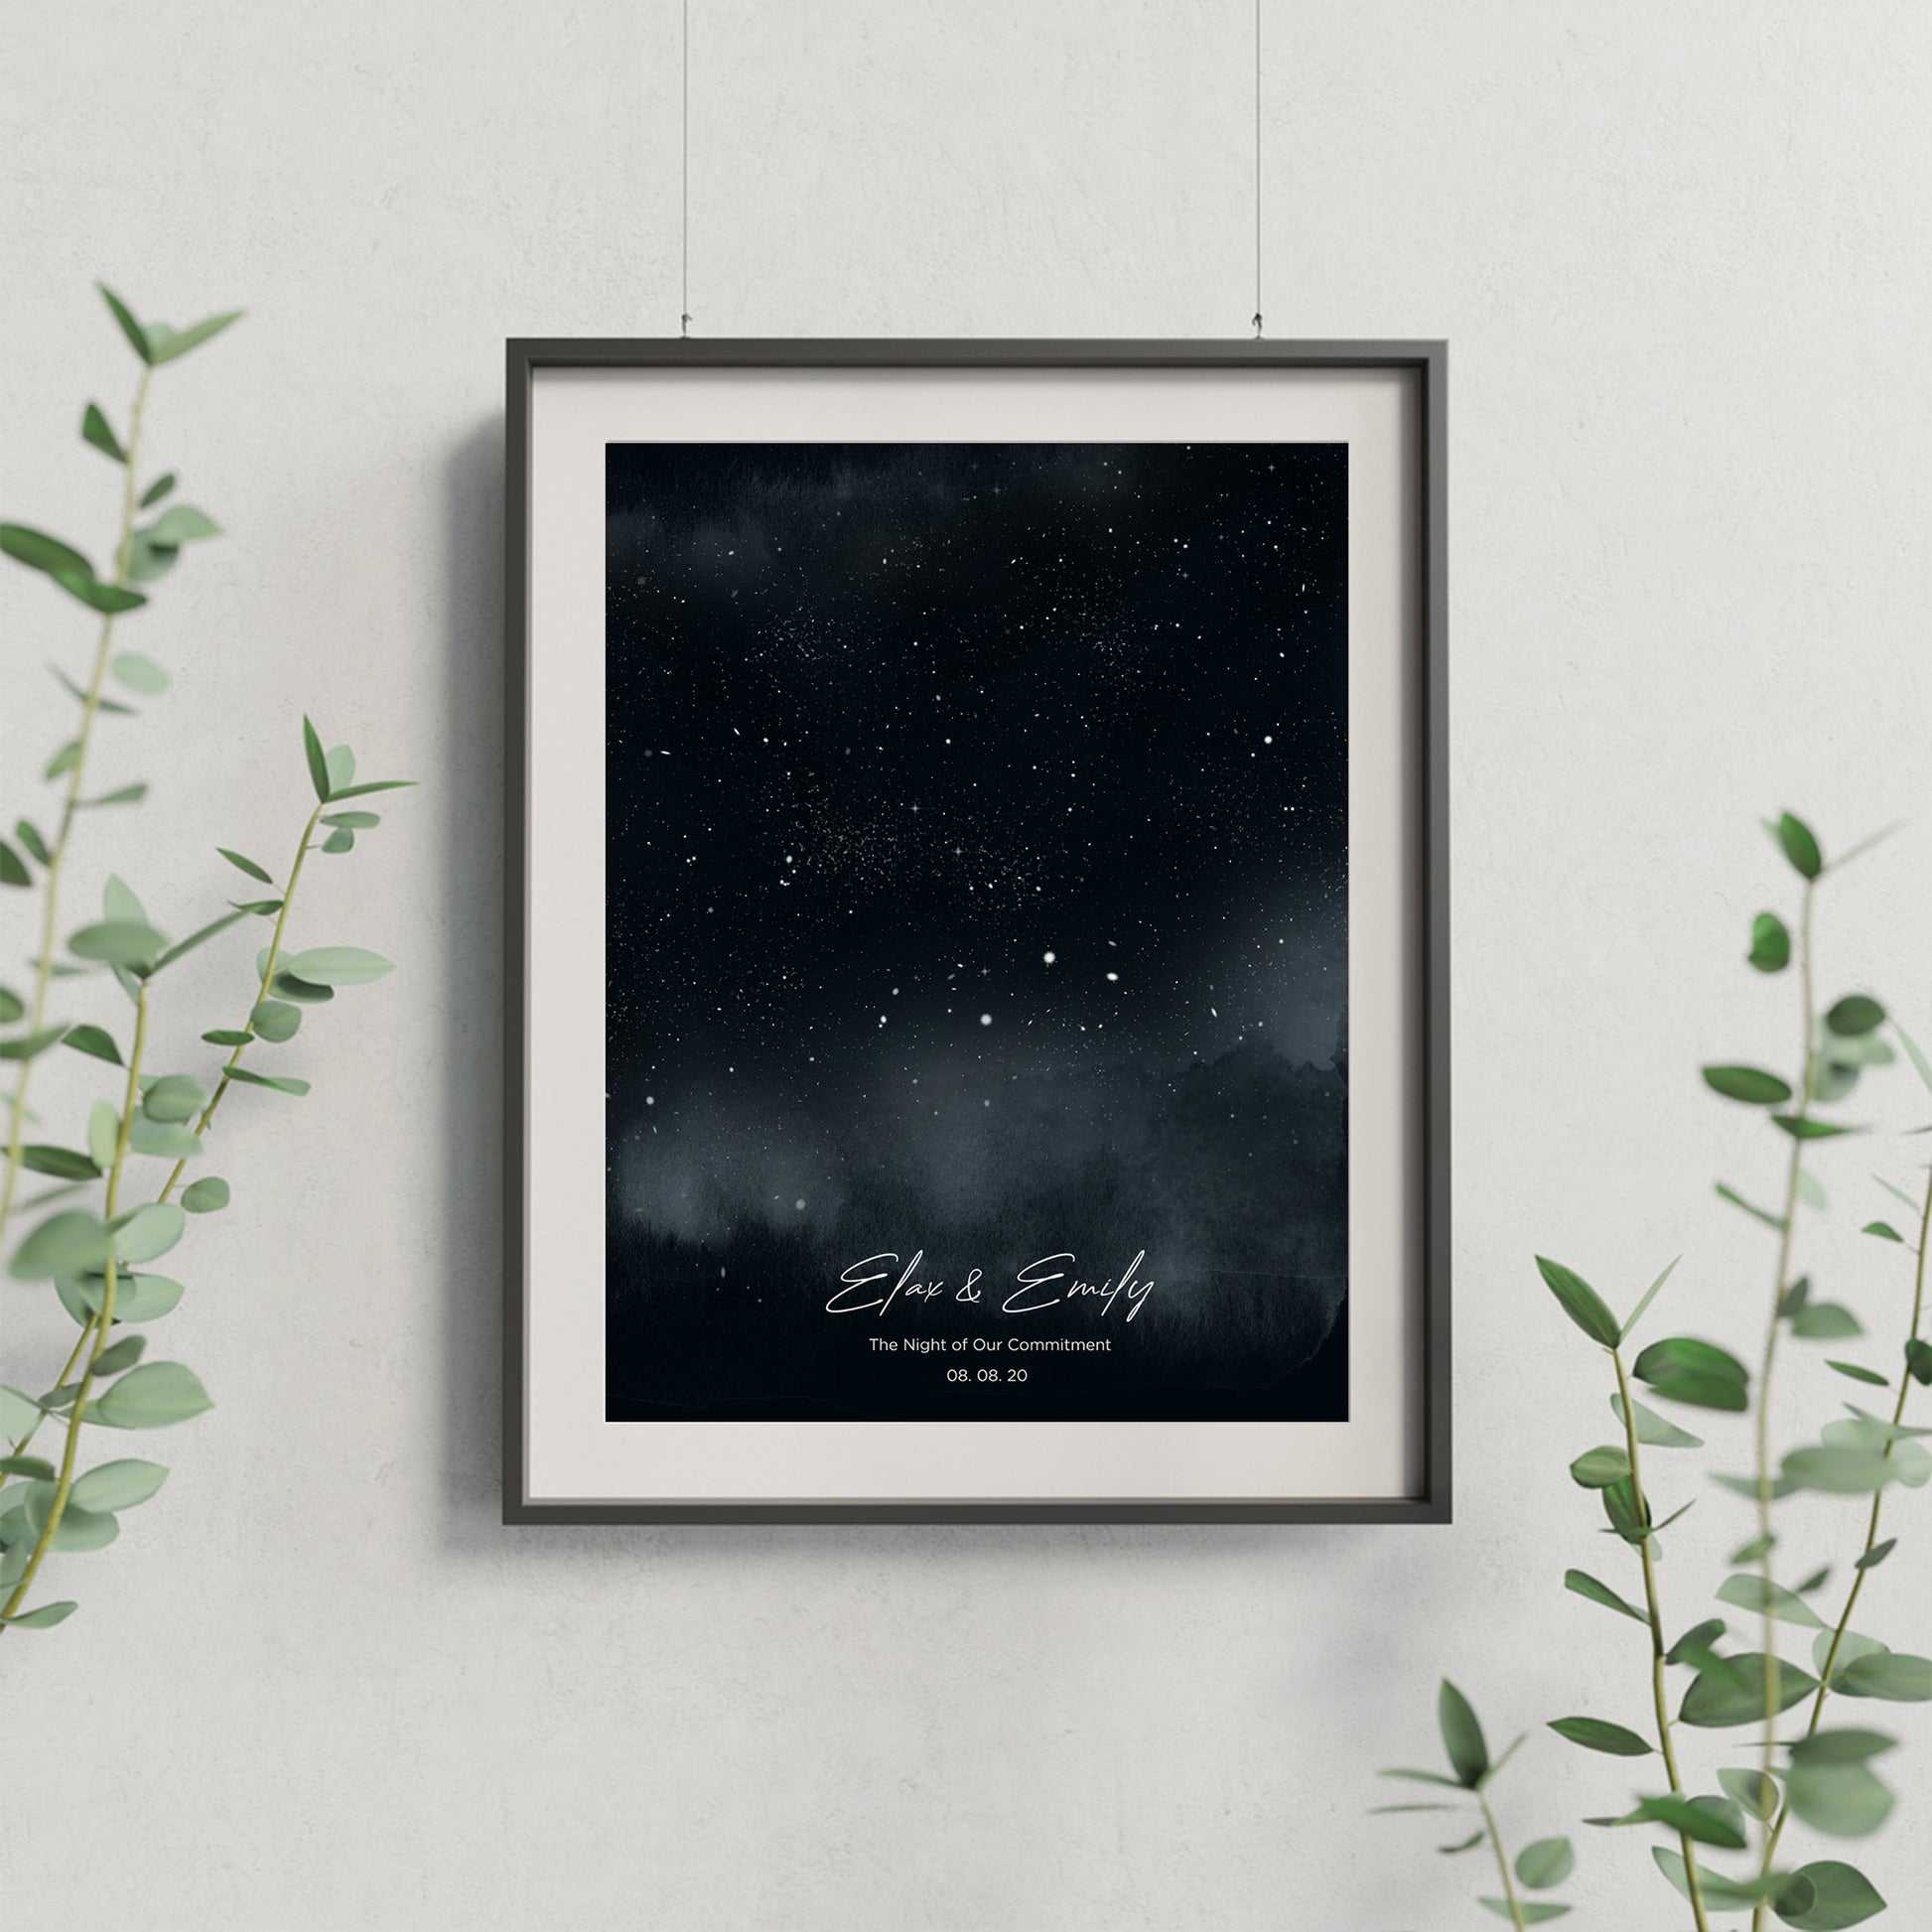 Custom star map gift: Personalized framed canvas portrait on wall.